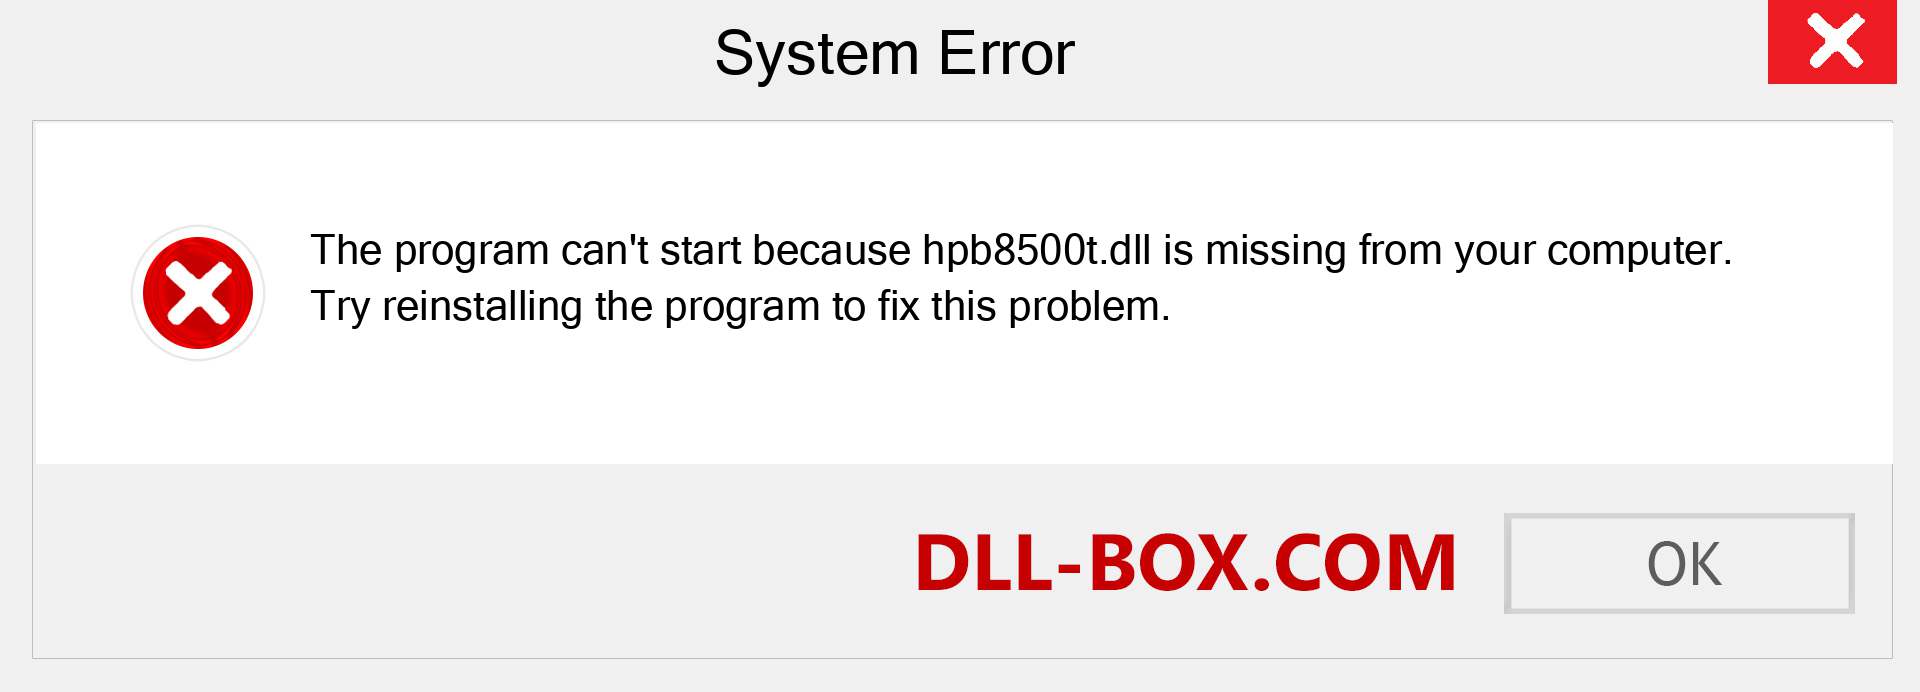  hpb8500t.dll file is missing?. Download for Windows 7, 8, 10 - Fix  hpb8500t dll Missing Error on Windows, photos, images